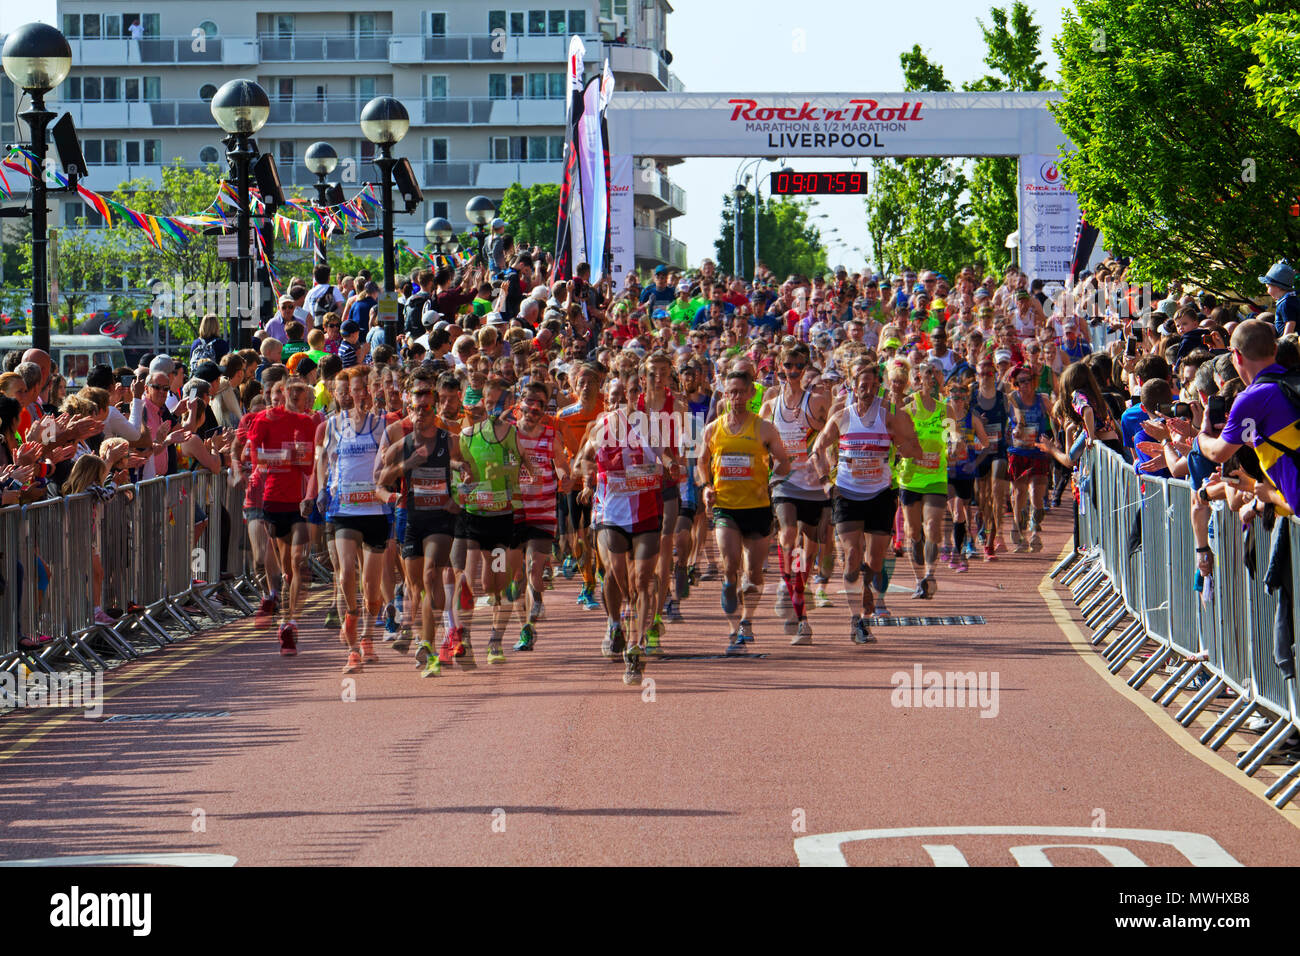 Rock N Roll Marathon High Resolution Stock Photography and Images - Alamy